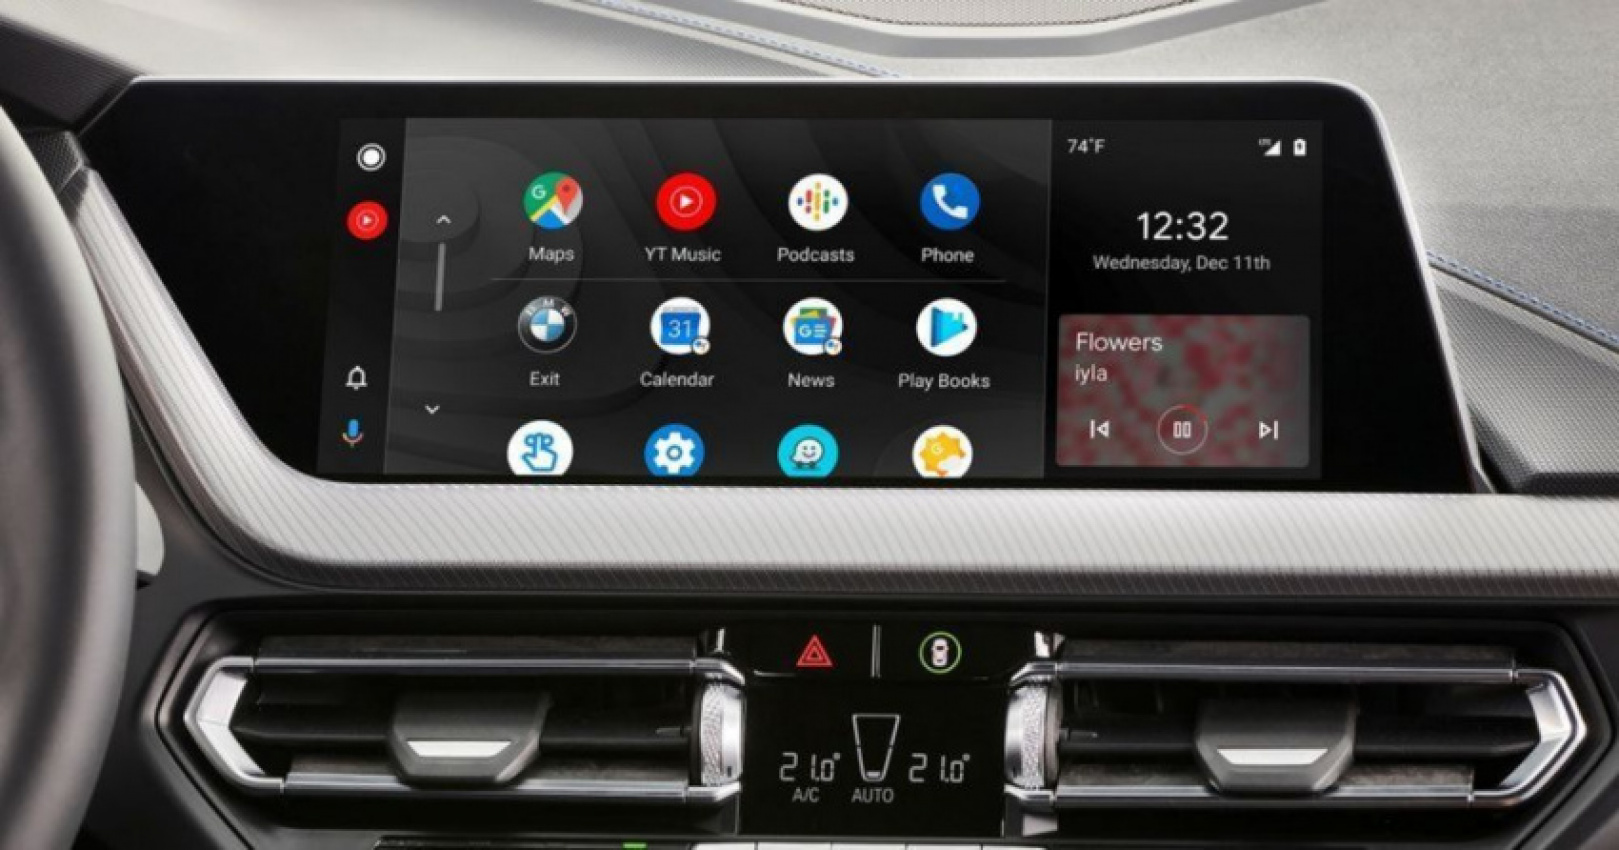 autos, cars, reviews, smart, android, android auto, audio, carplay, infotainment, insights, media playback, on-board navigation, smartphone, touchscreen, android, your smartphone is the ultimate infotainment system